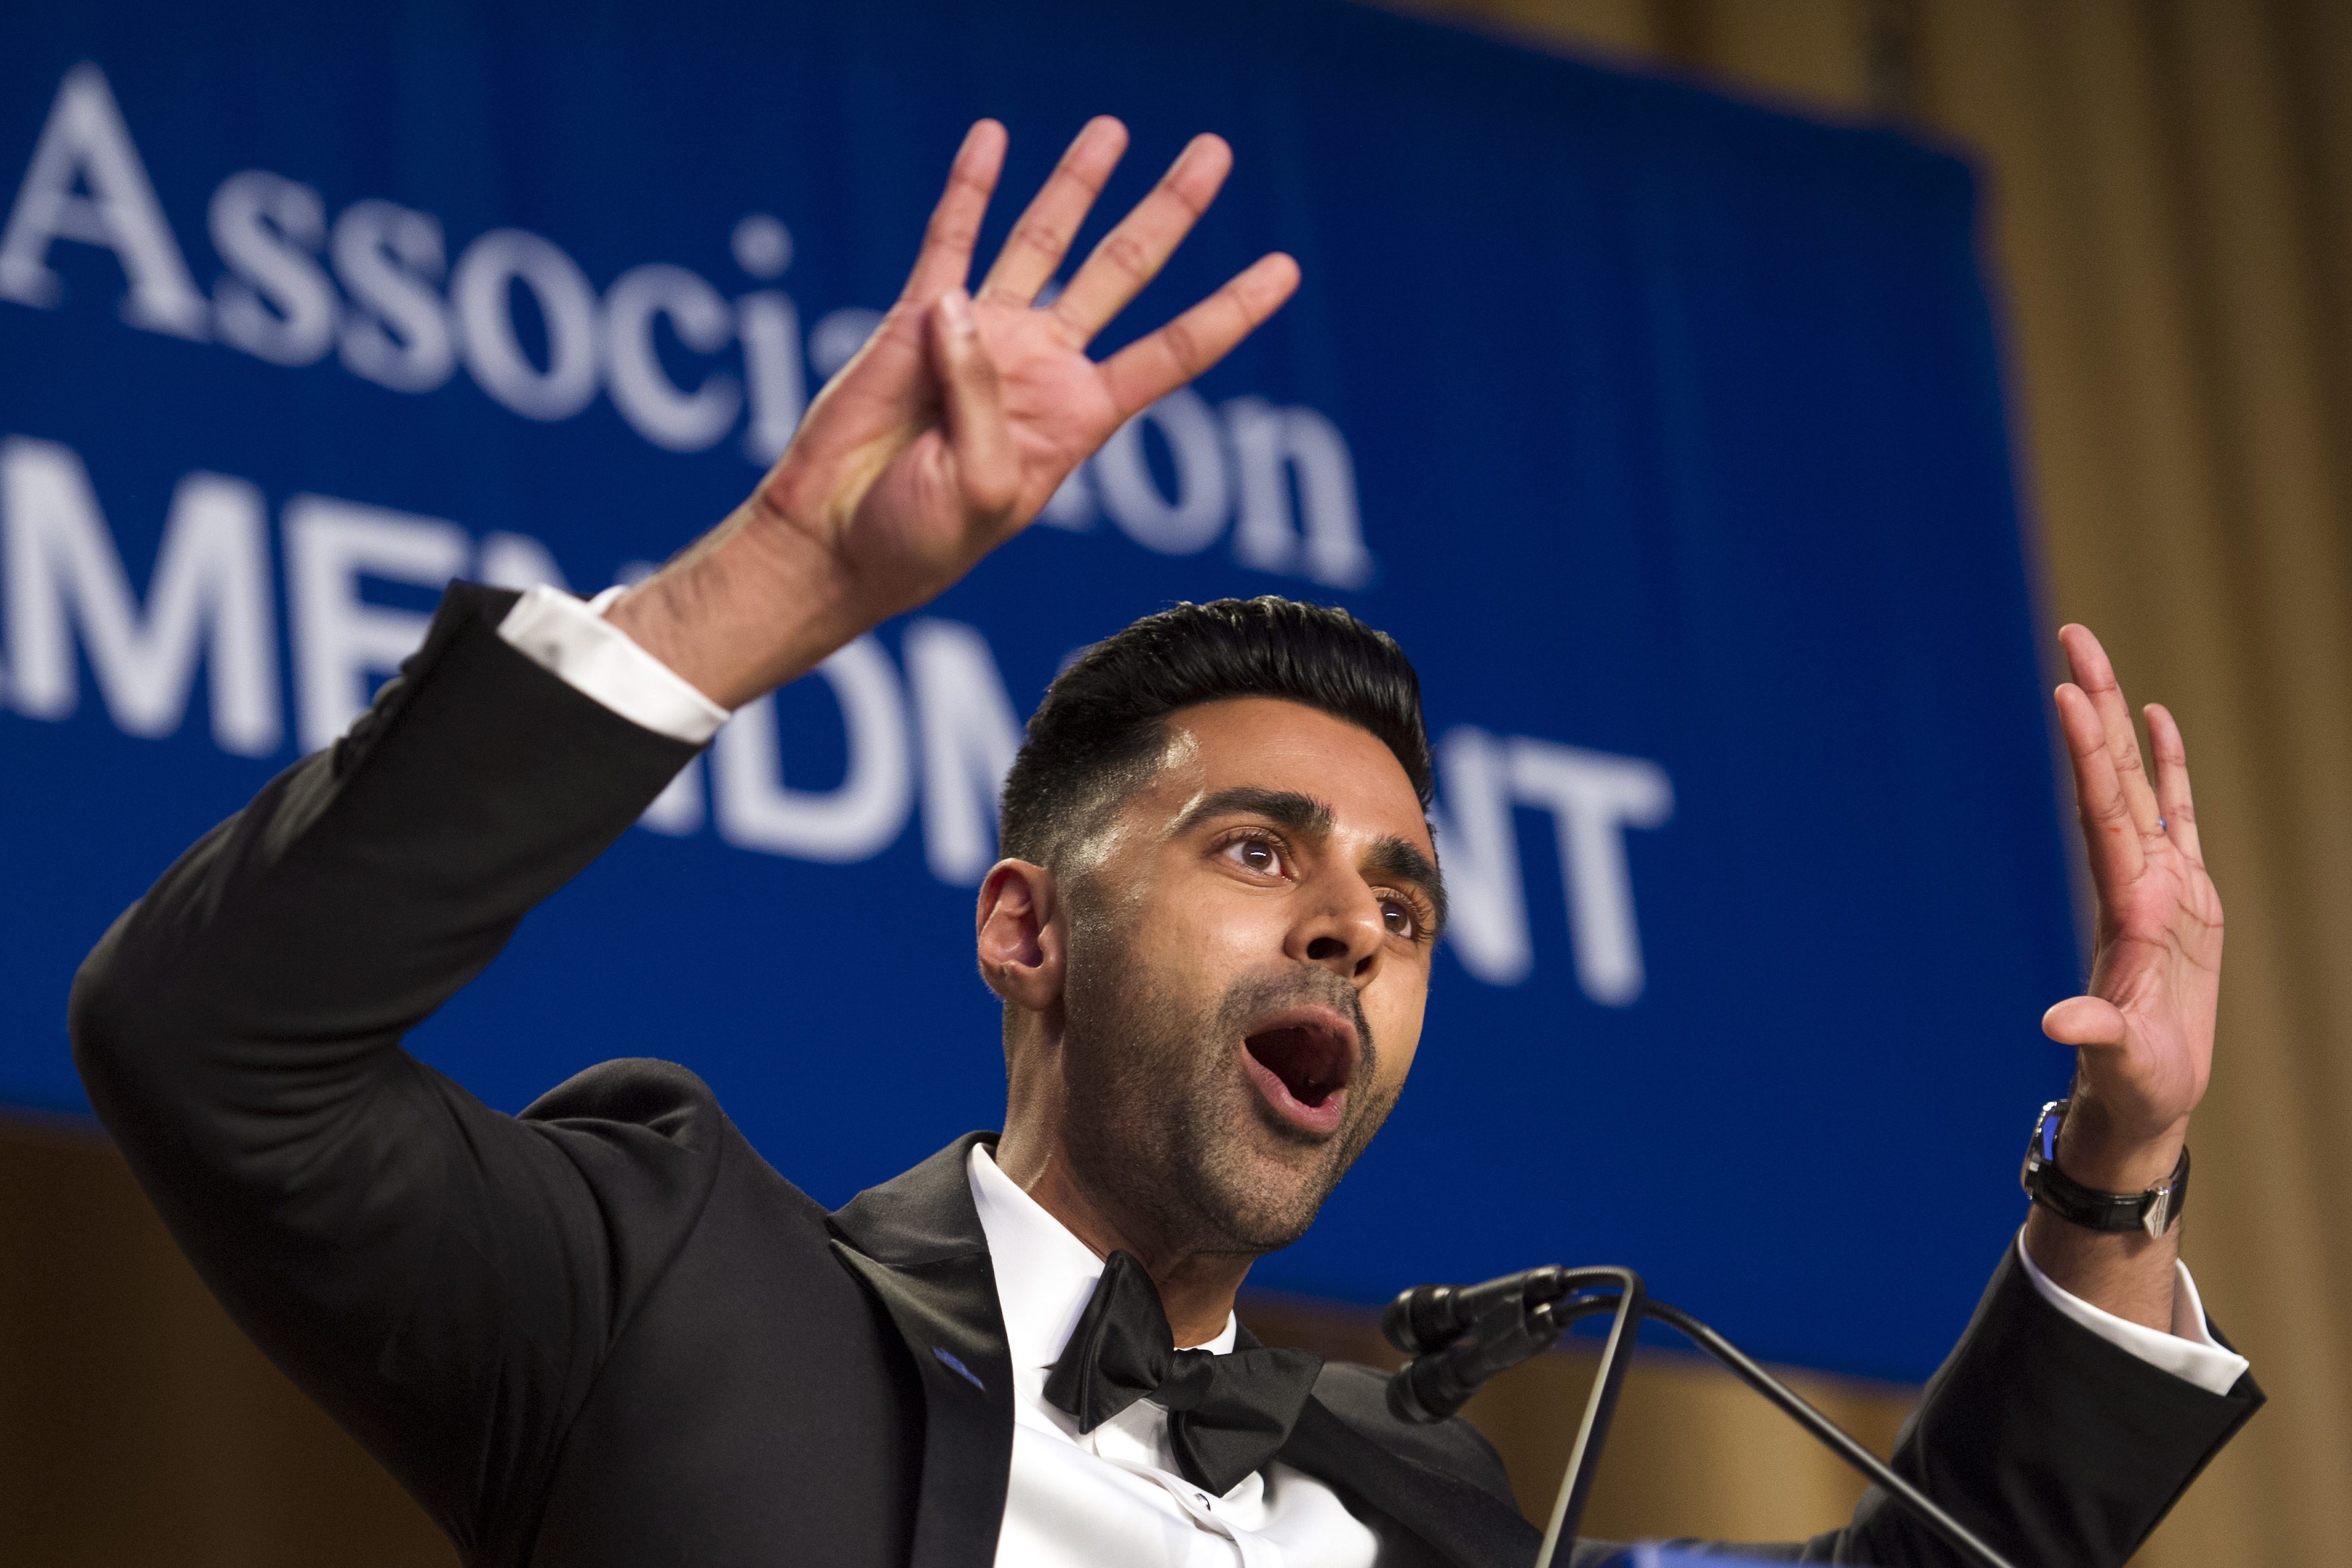 Journalists honour press freedom at White House Correspondents' dinner